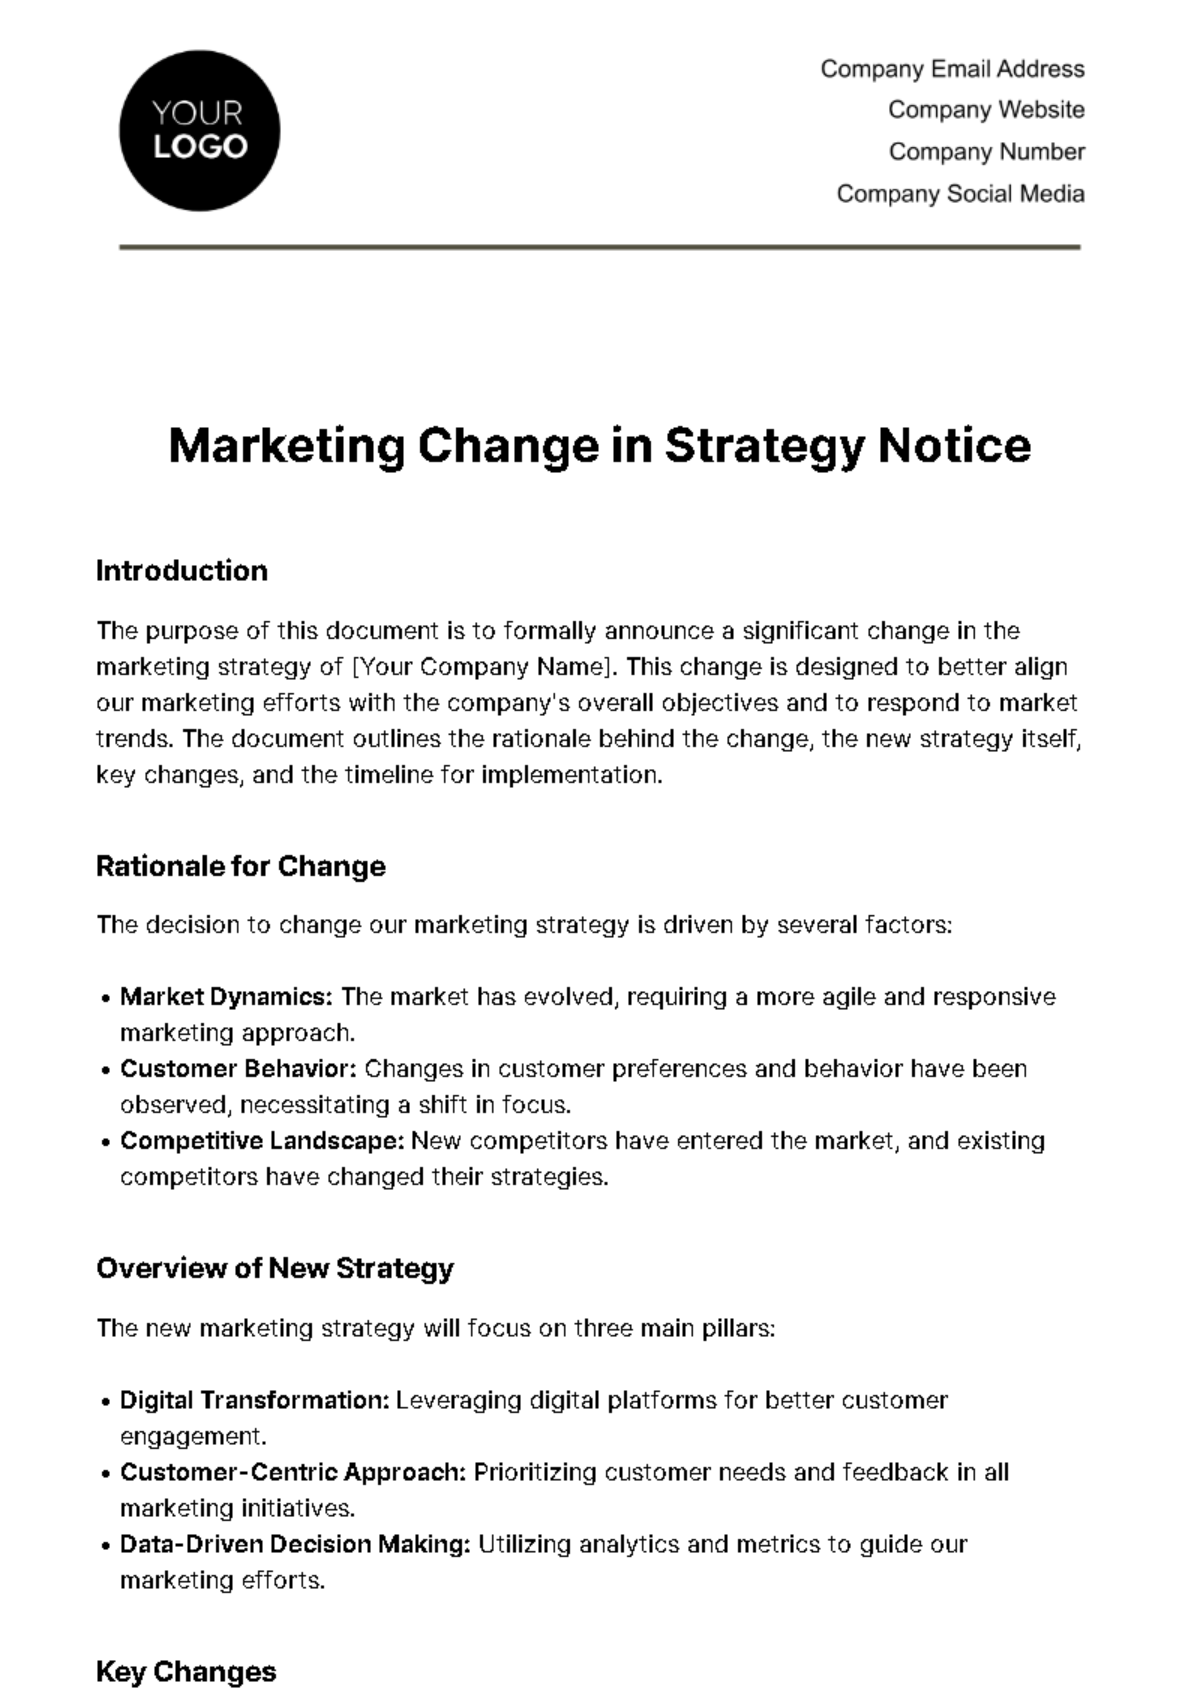 Free Marketing Change in Strategy Notice Template